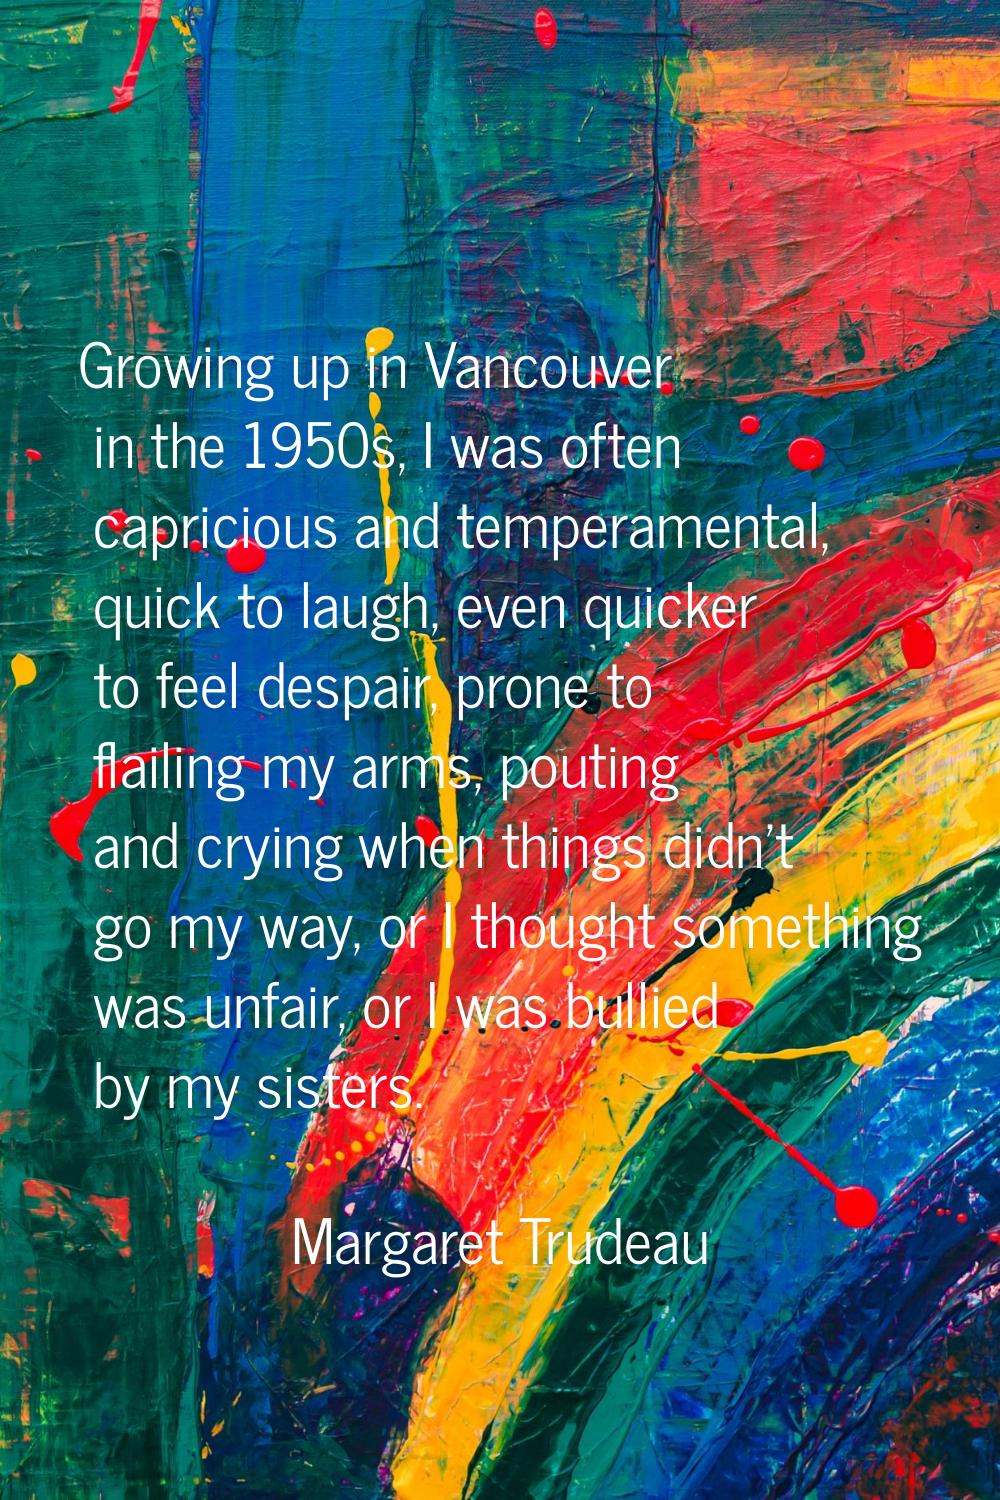 Growing up in Vancouver in the 1950s, I was often capricious and temperamental, quick to laugh, eve